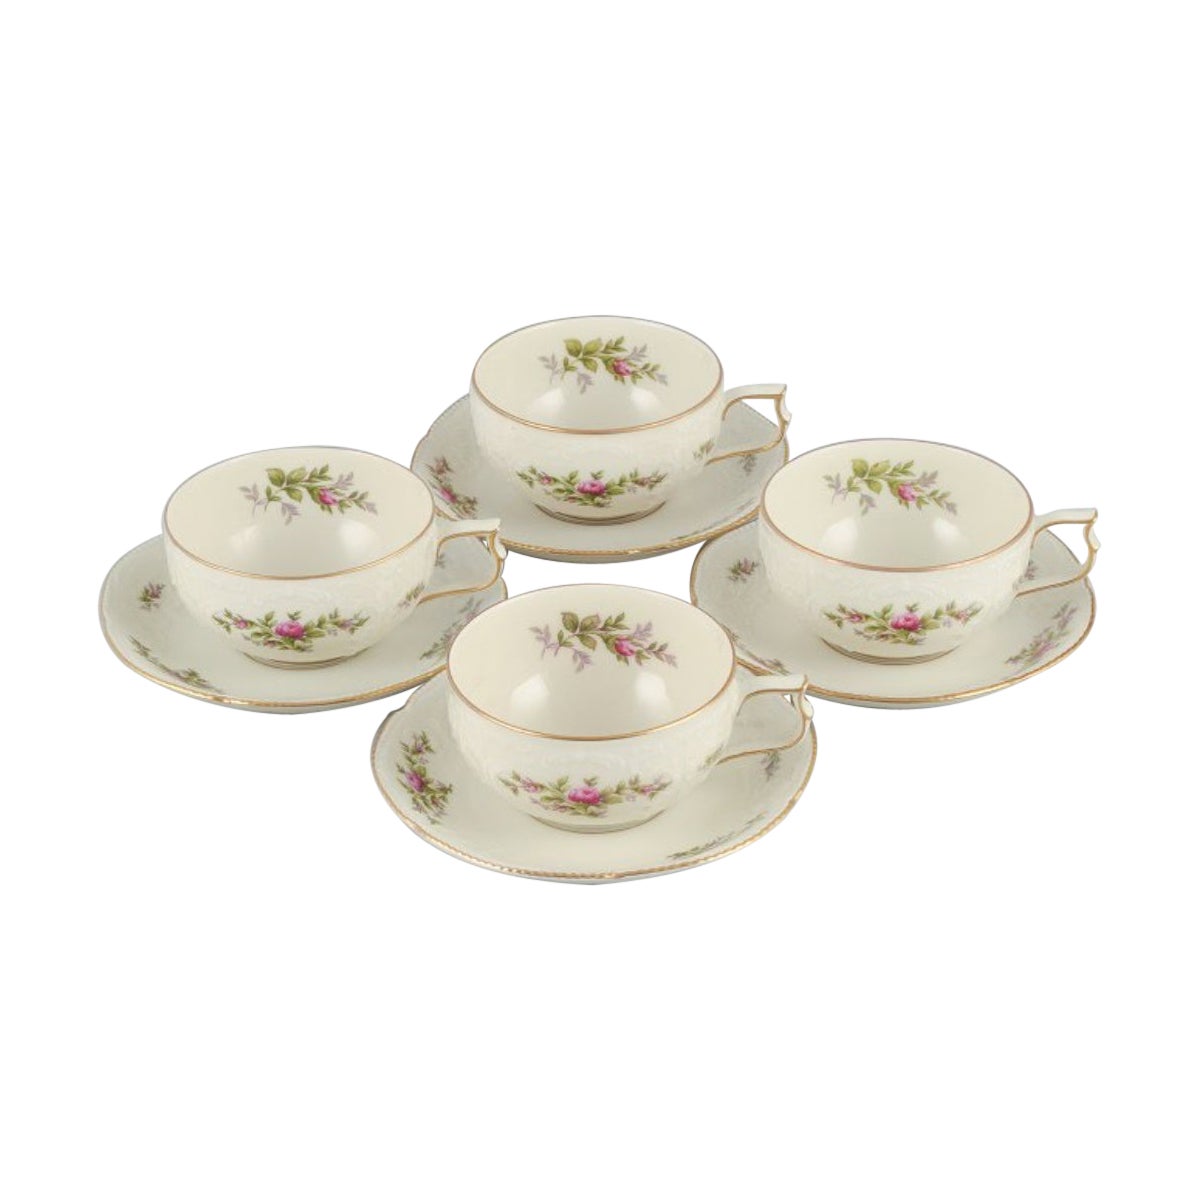 Rosenthal, Germany. "Sanssouci", Four Cream-Colored Teacups with Saucers For Sale